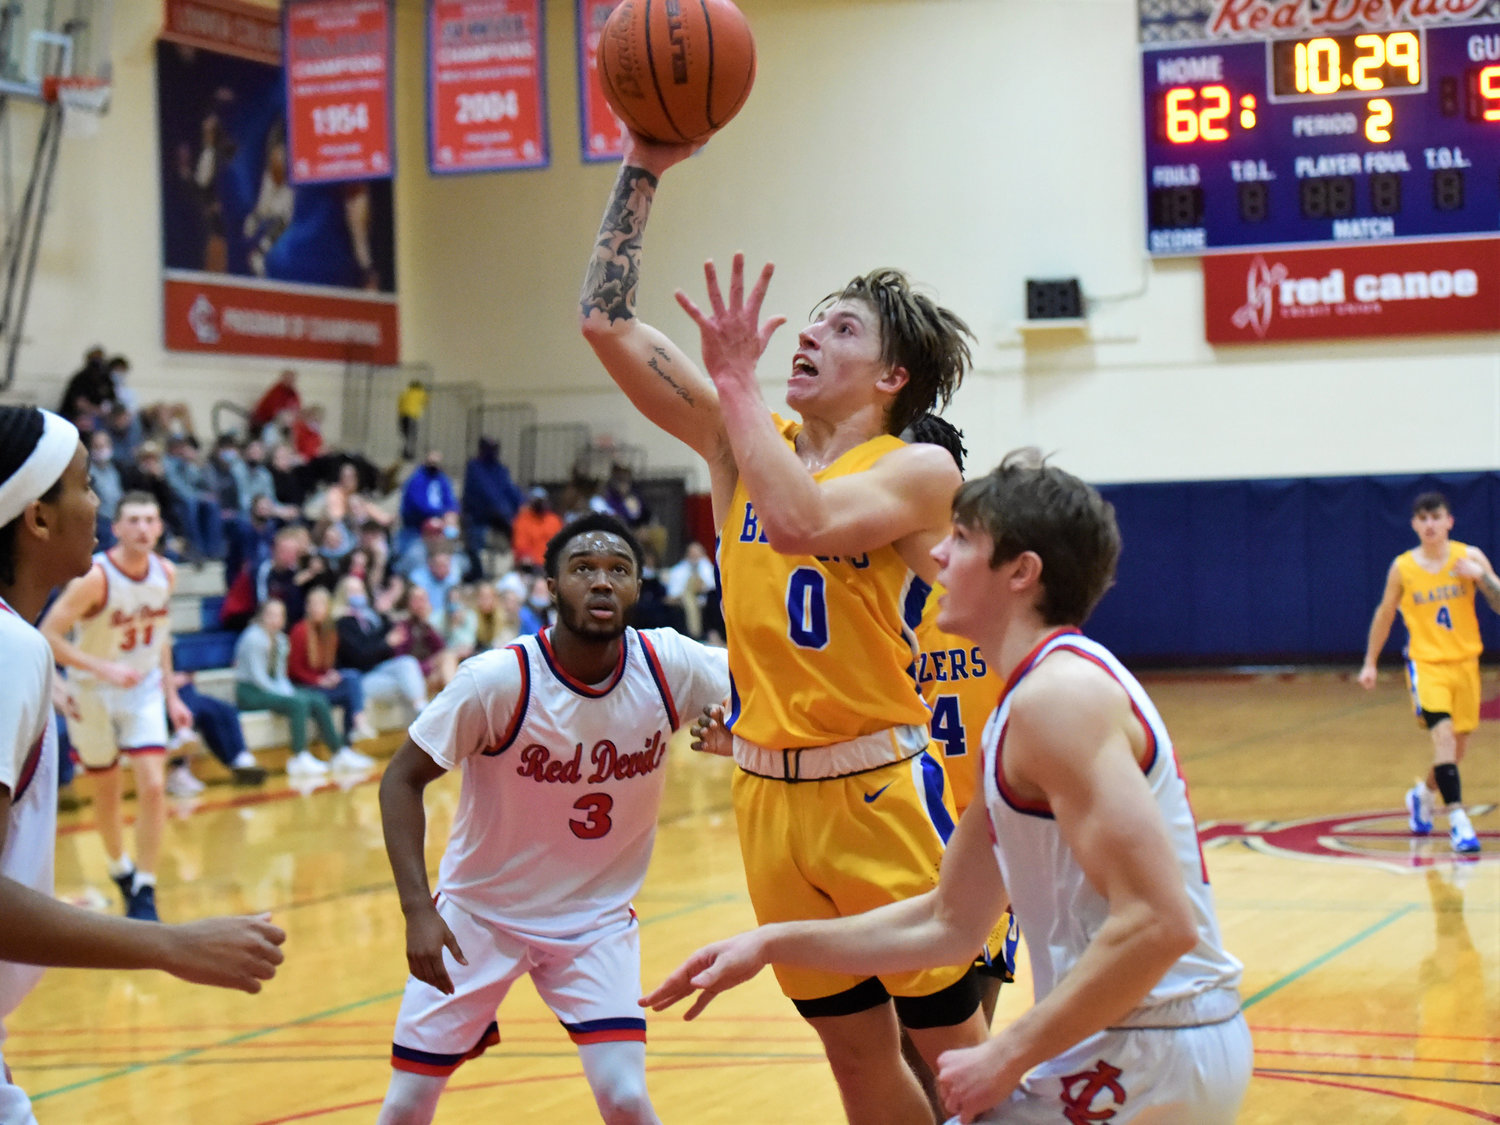 Centralia College's Colby White (0) drives to the bucket against Lower Columbia on Feb. 2.